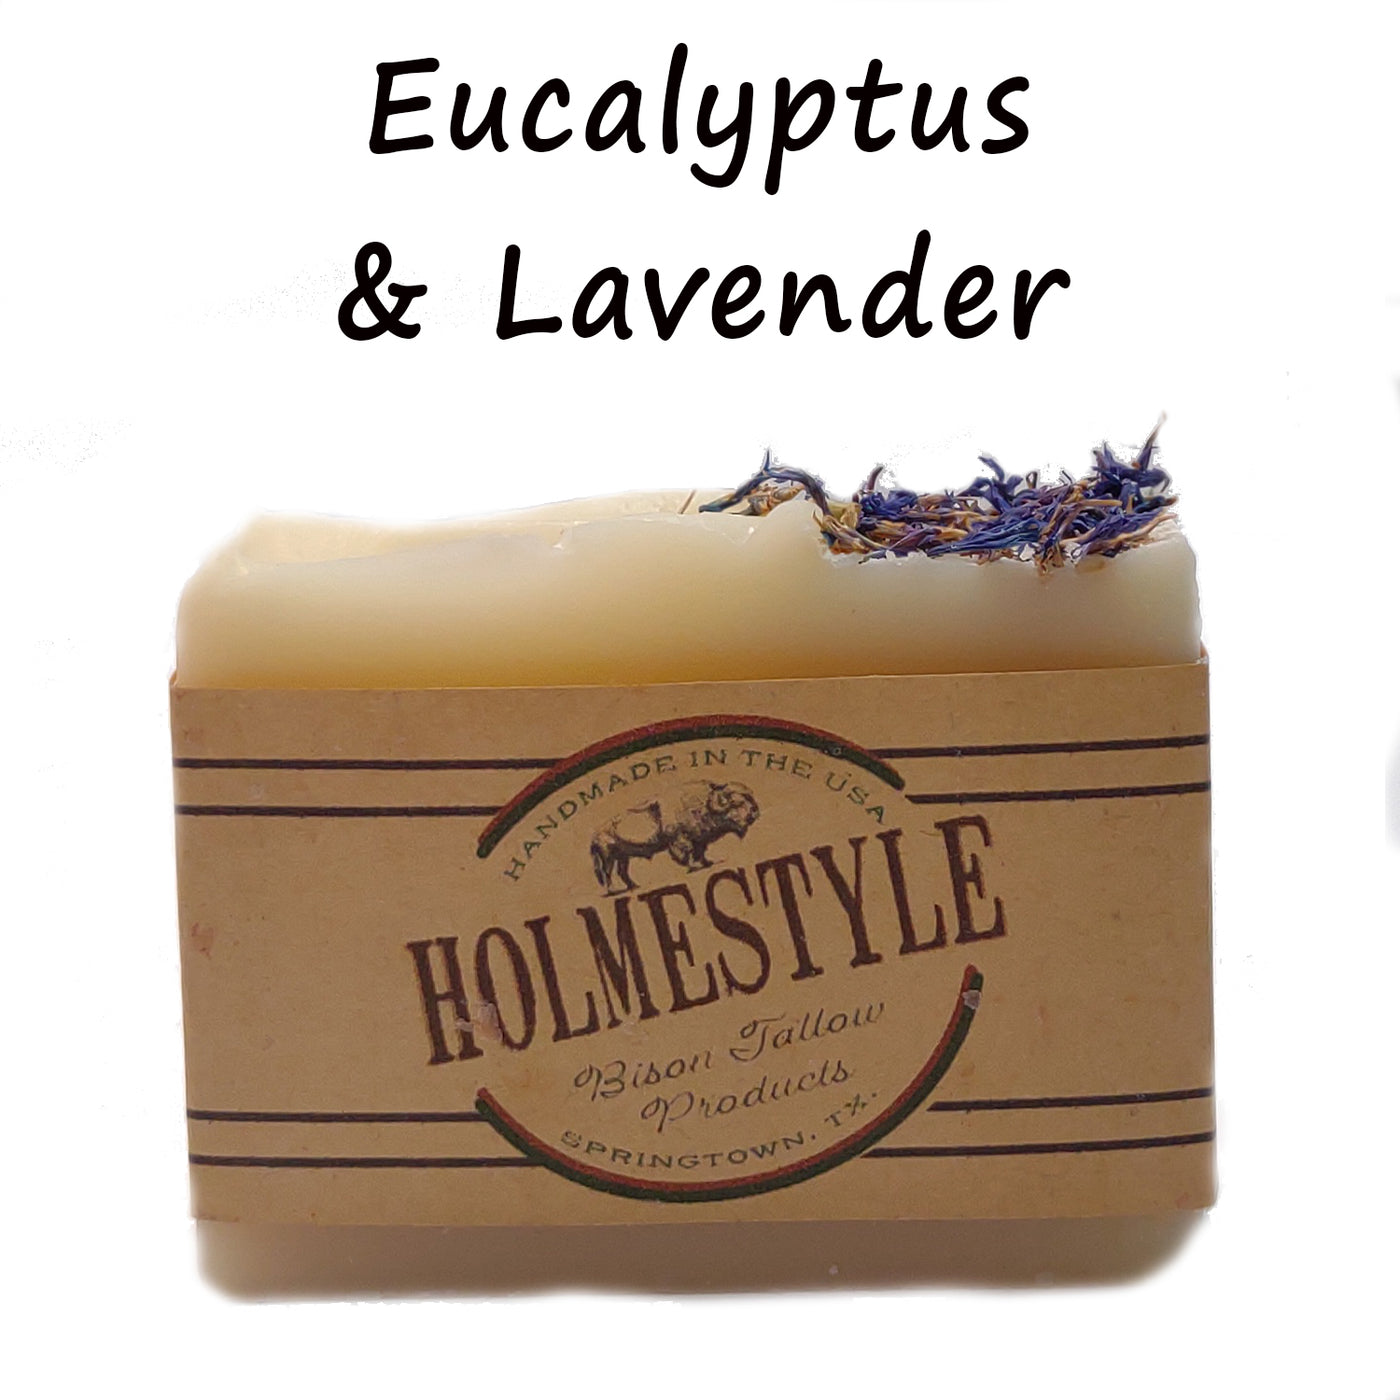 Handmade Bison Tallow Soap by Holmestyle Homestead